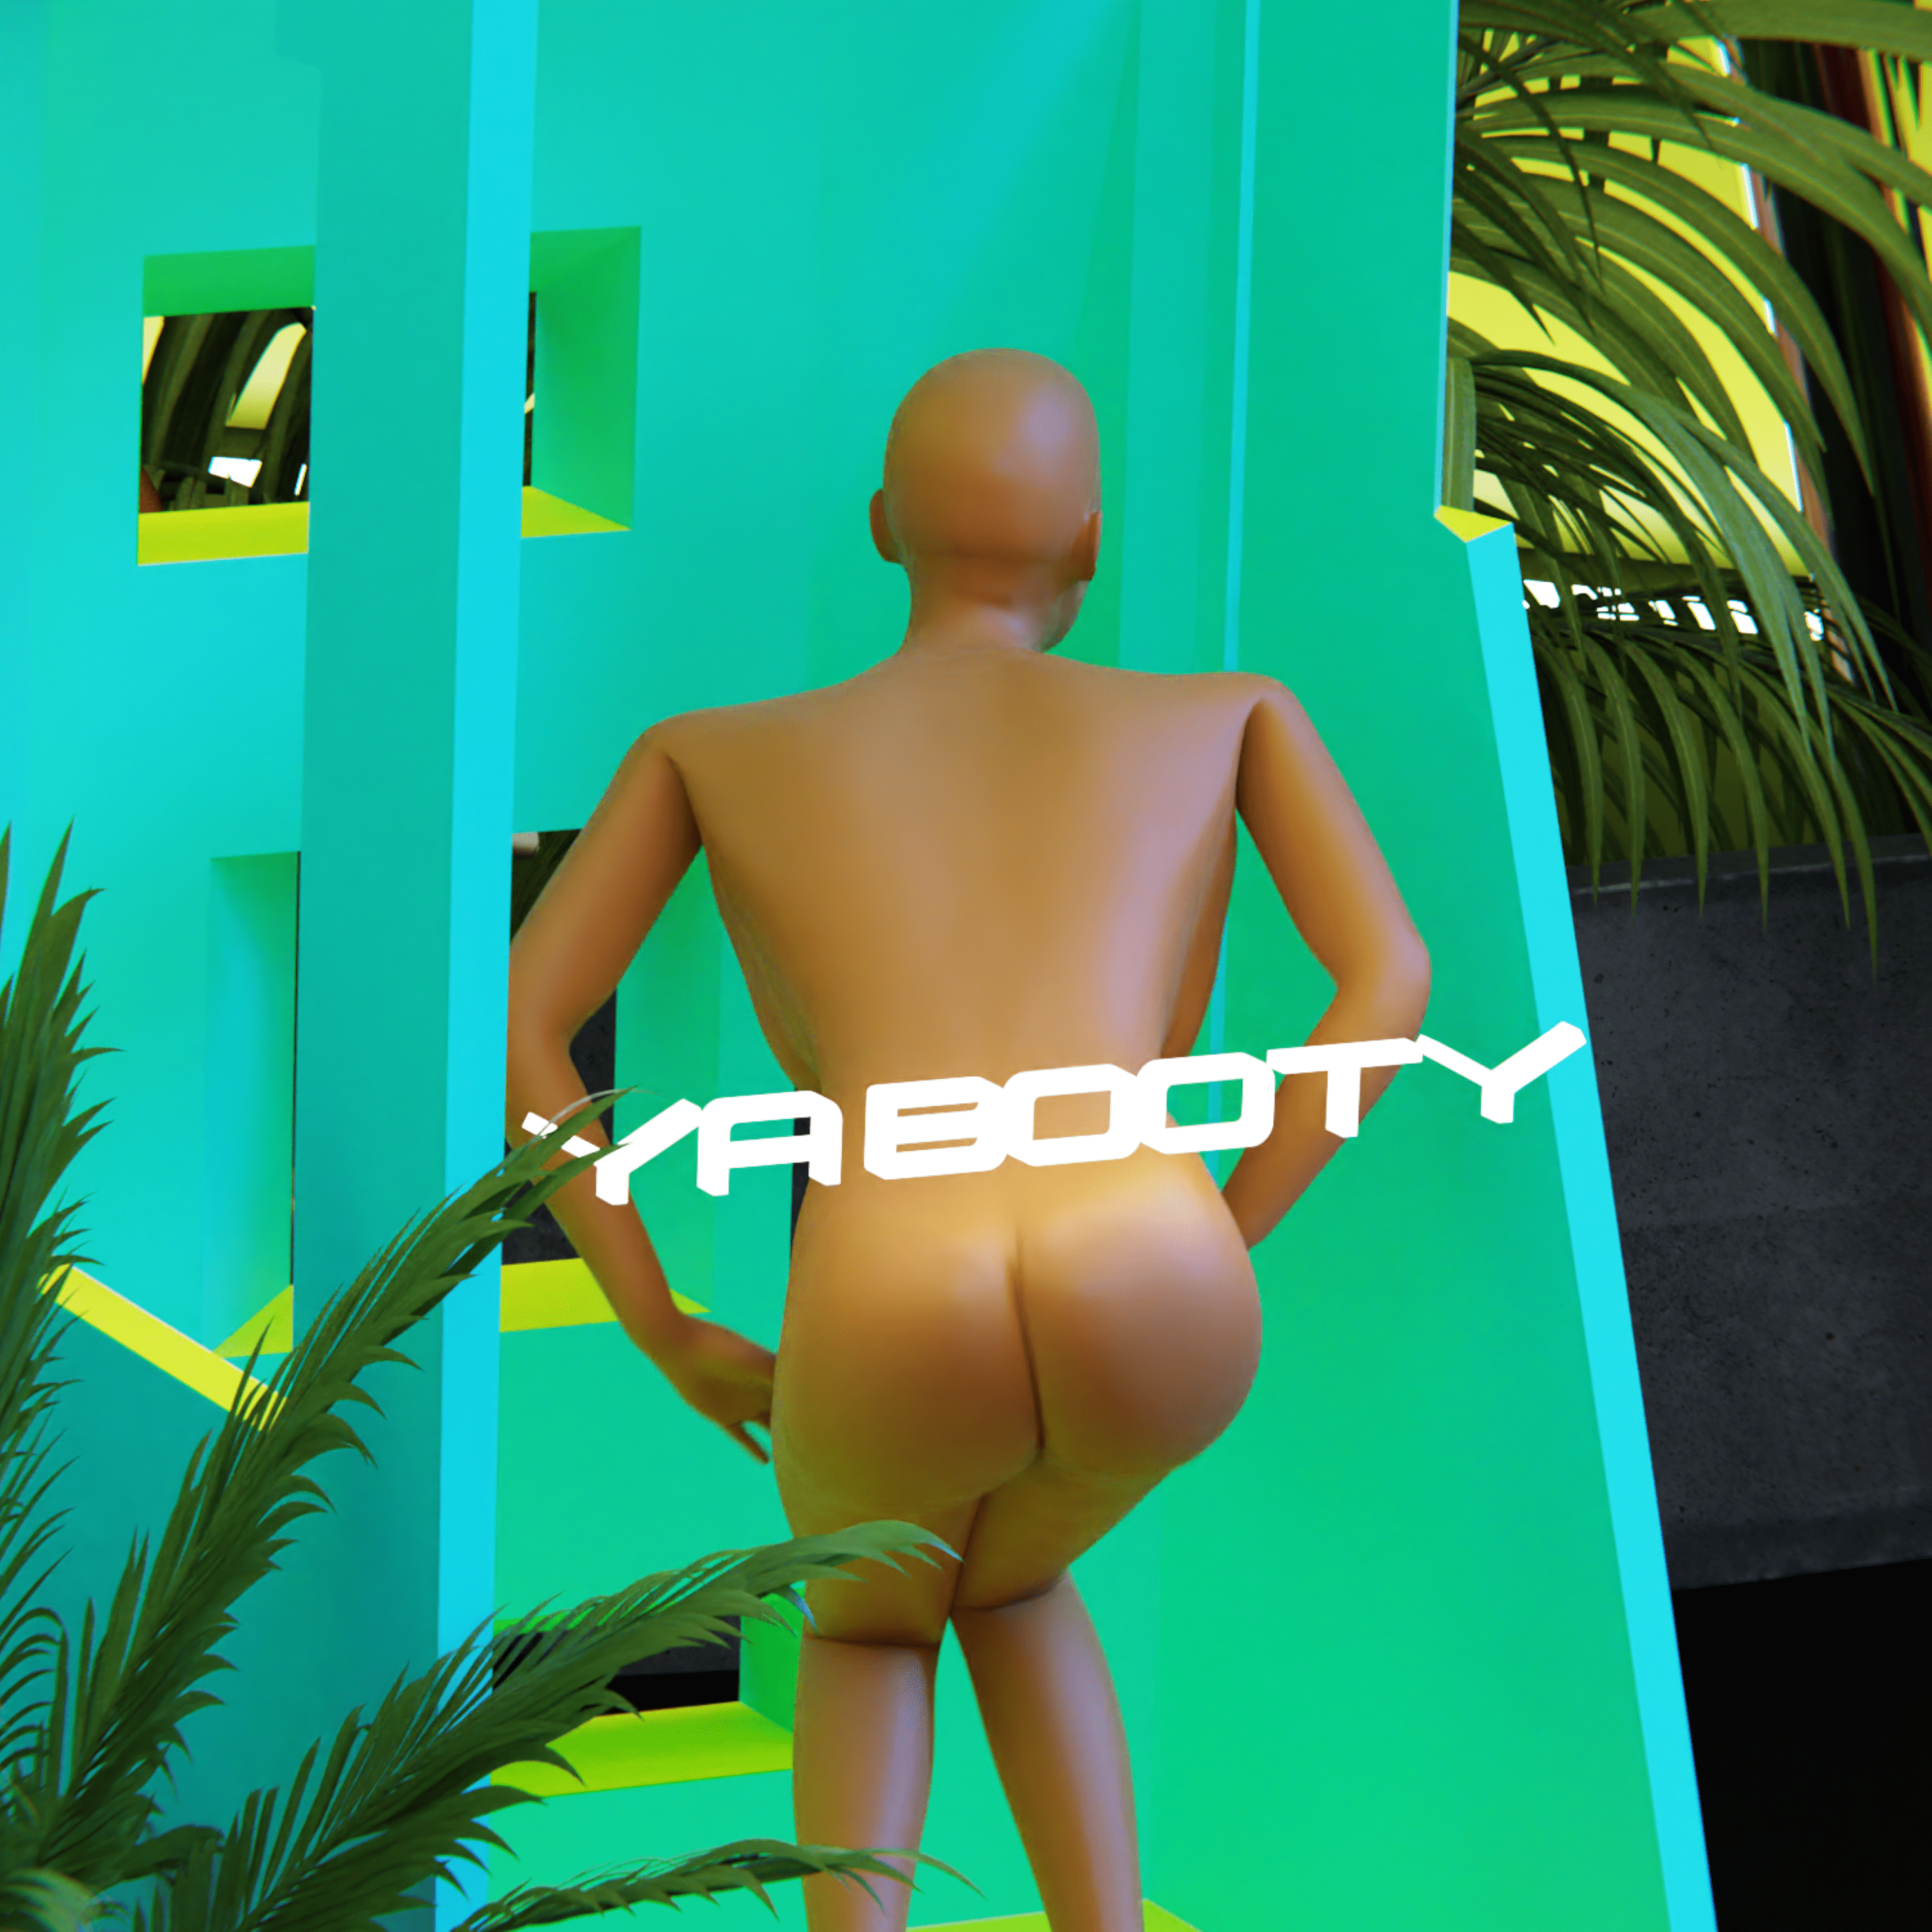 Cover art for Ya Booty by Dabow